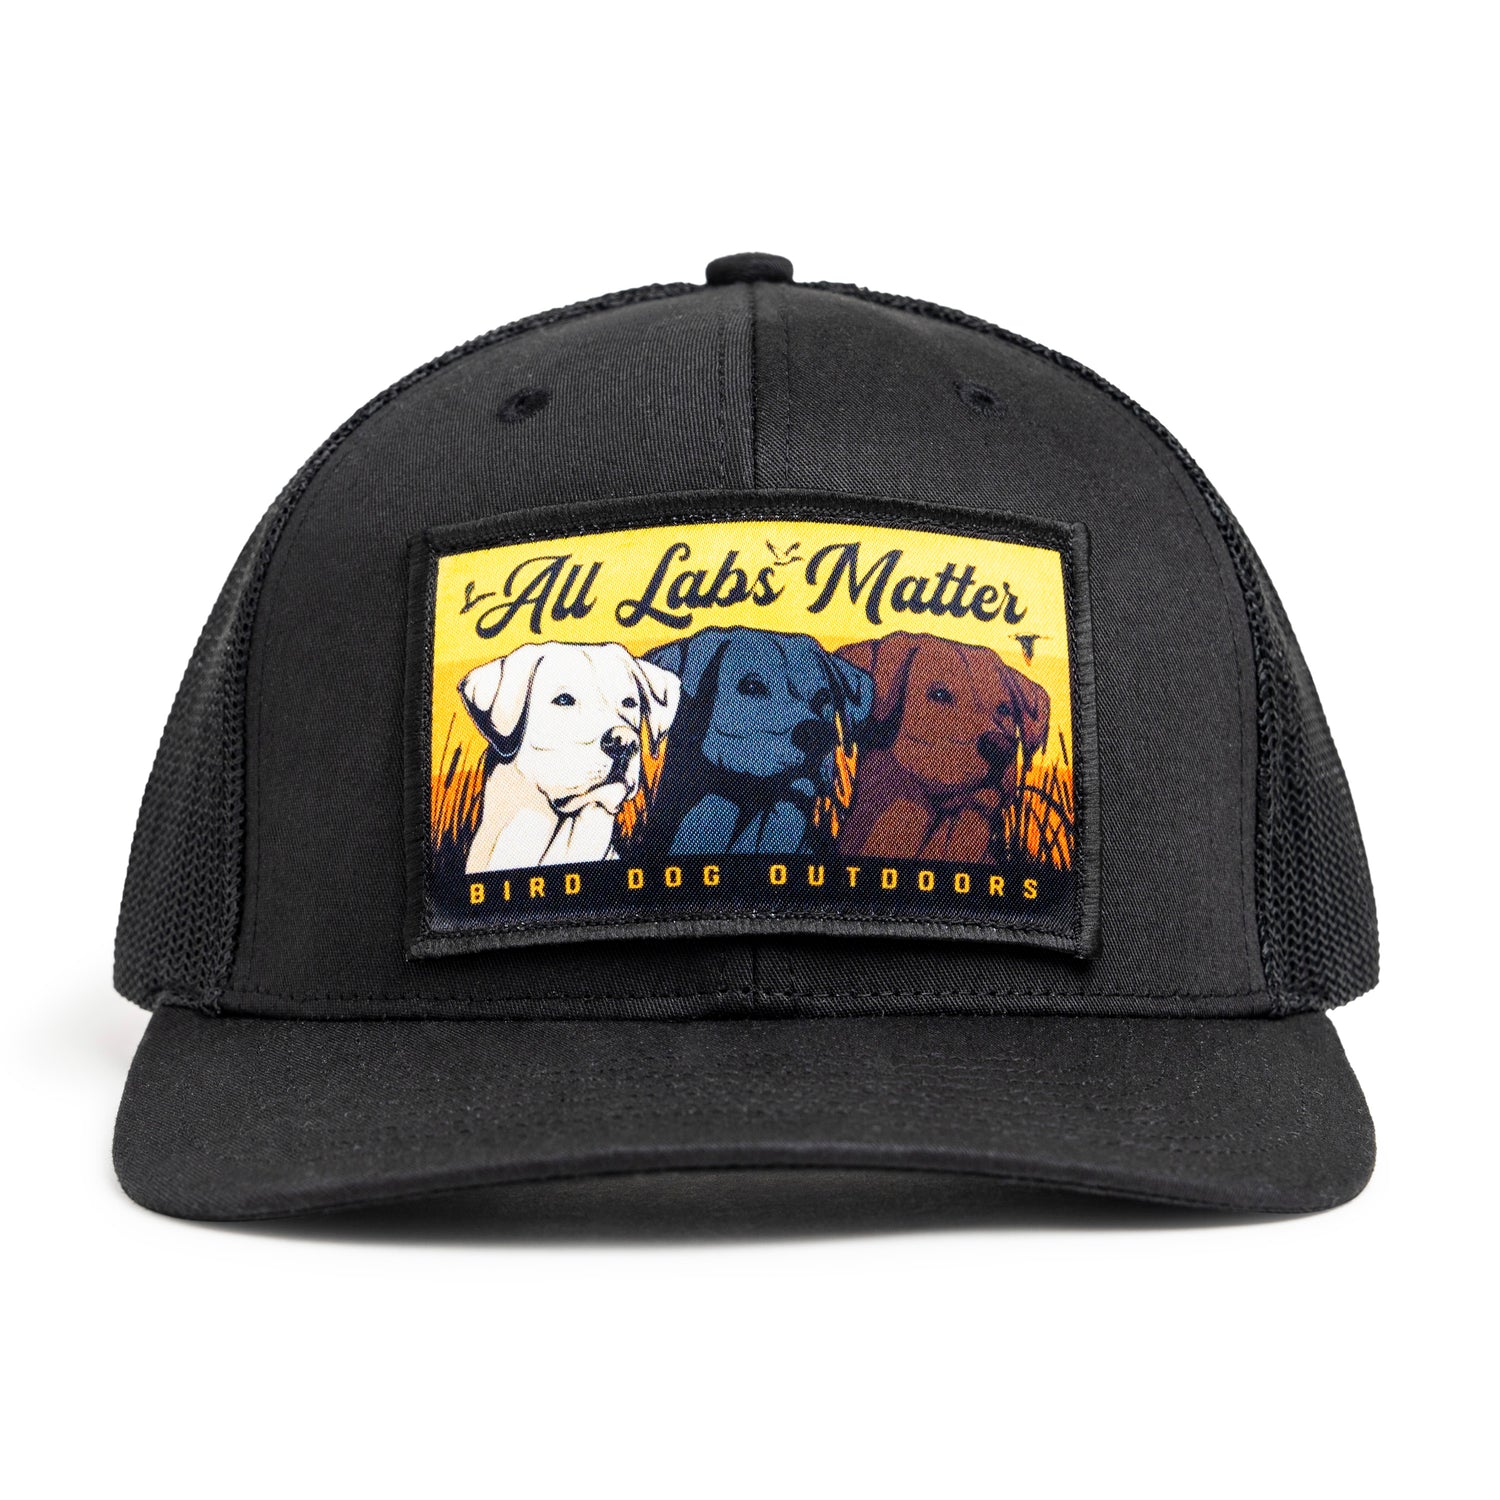 All Labs Matter Hat